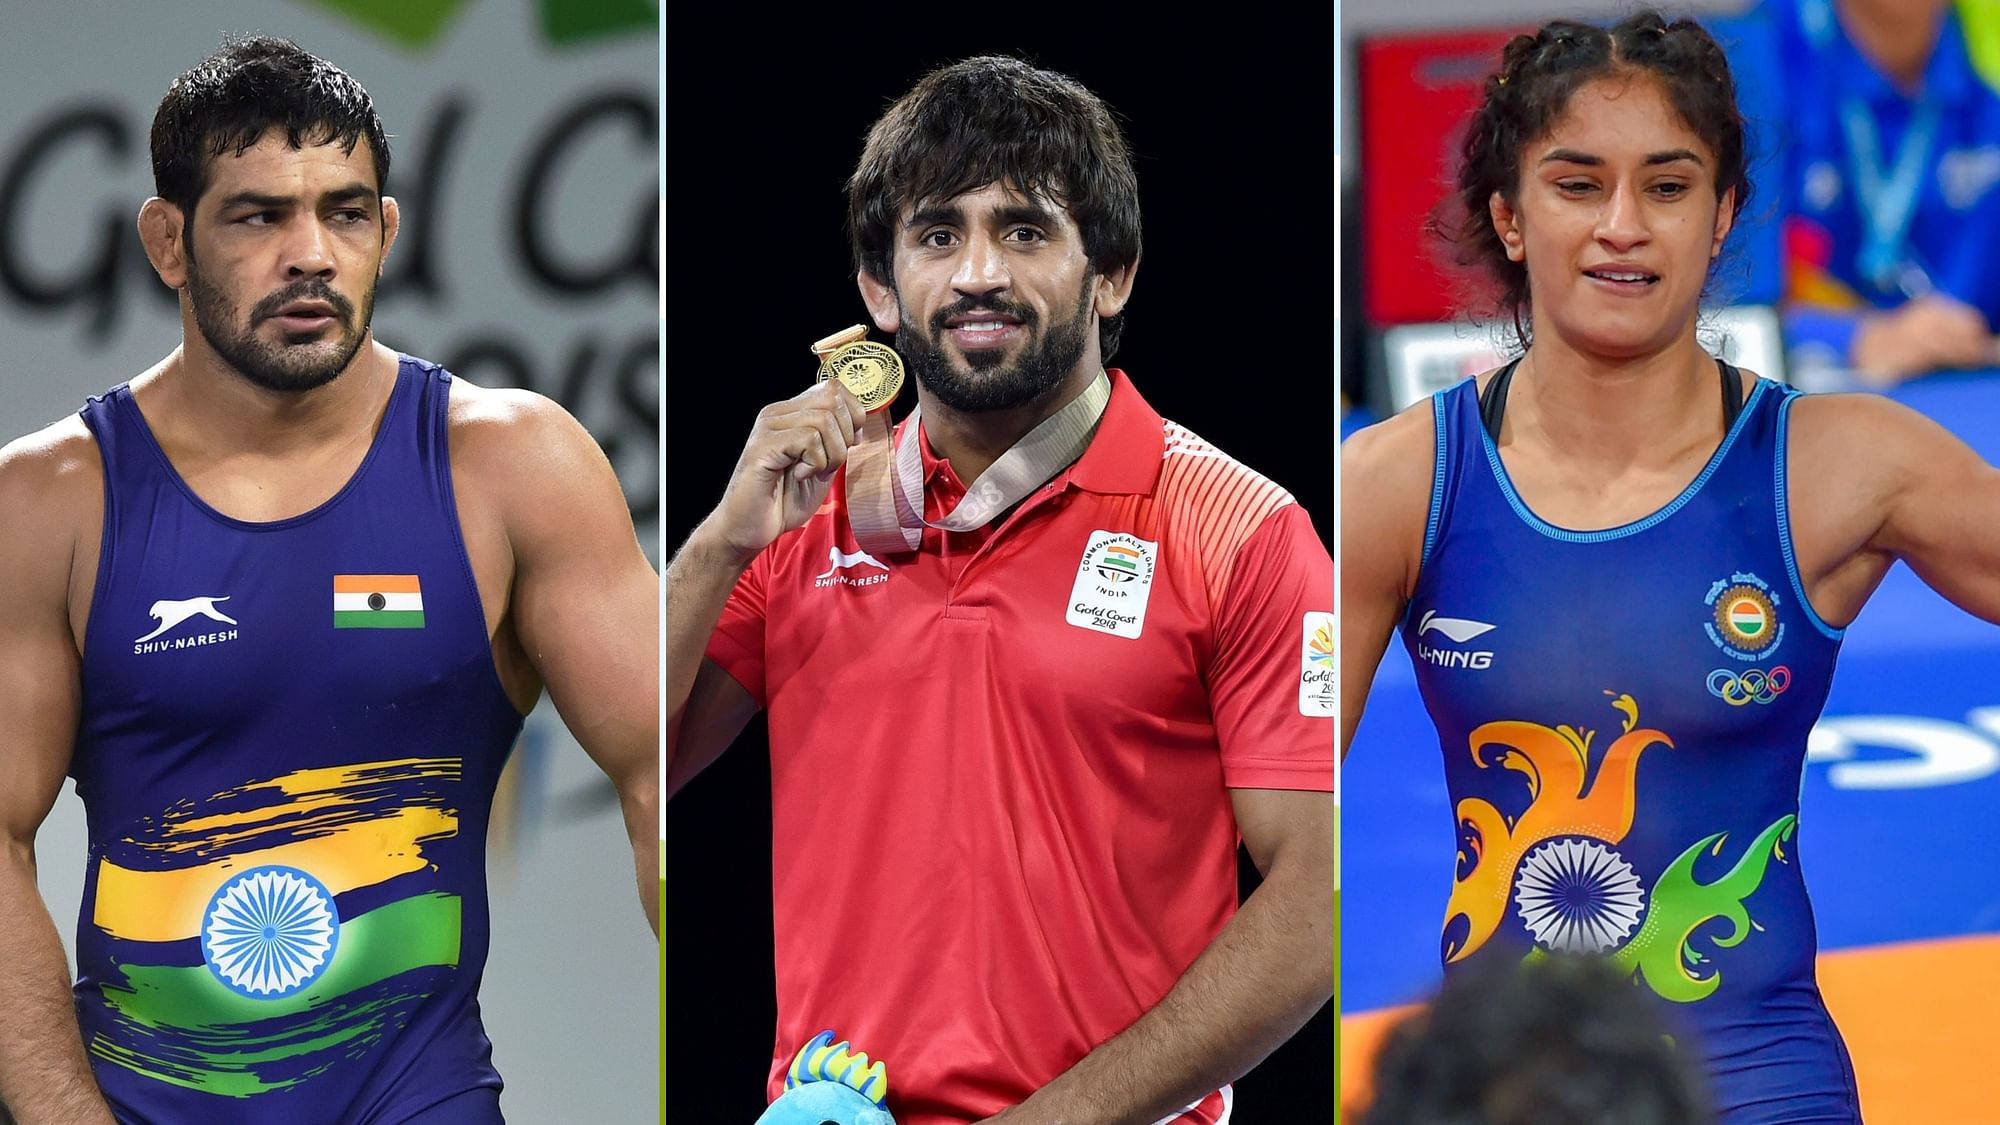 Sushil Kumar, Bajrang Punia and Vinesh Phogat are all part of India’s 30-strong contingent at the World Wrestling Championships.